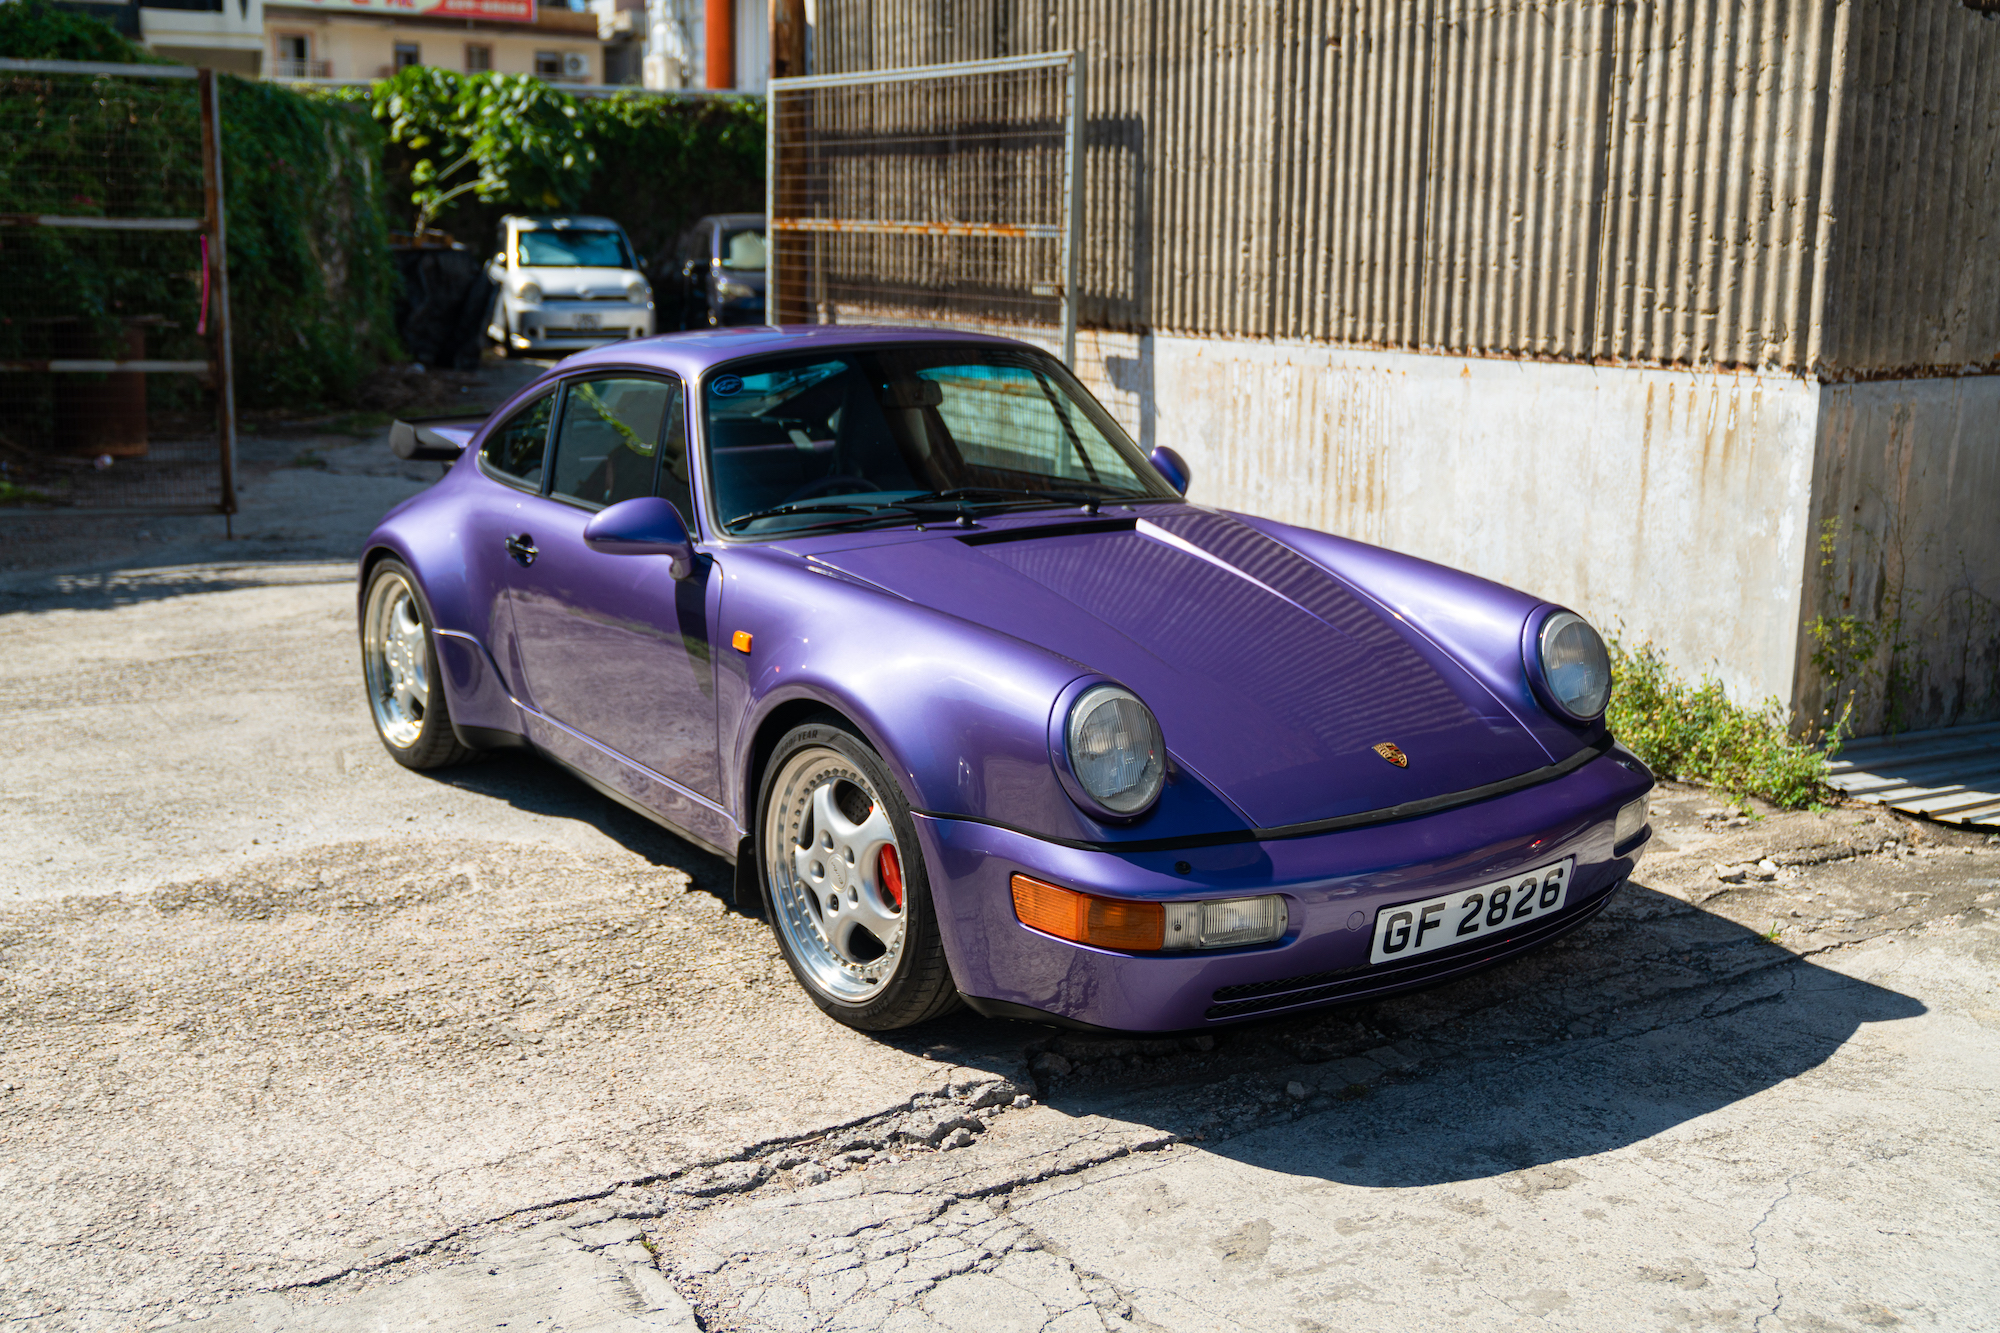 1993 PORSCHE 911 (964) TURBO 3.6 for sale by auction in Hong Kong 